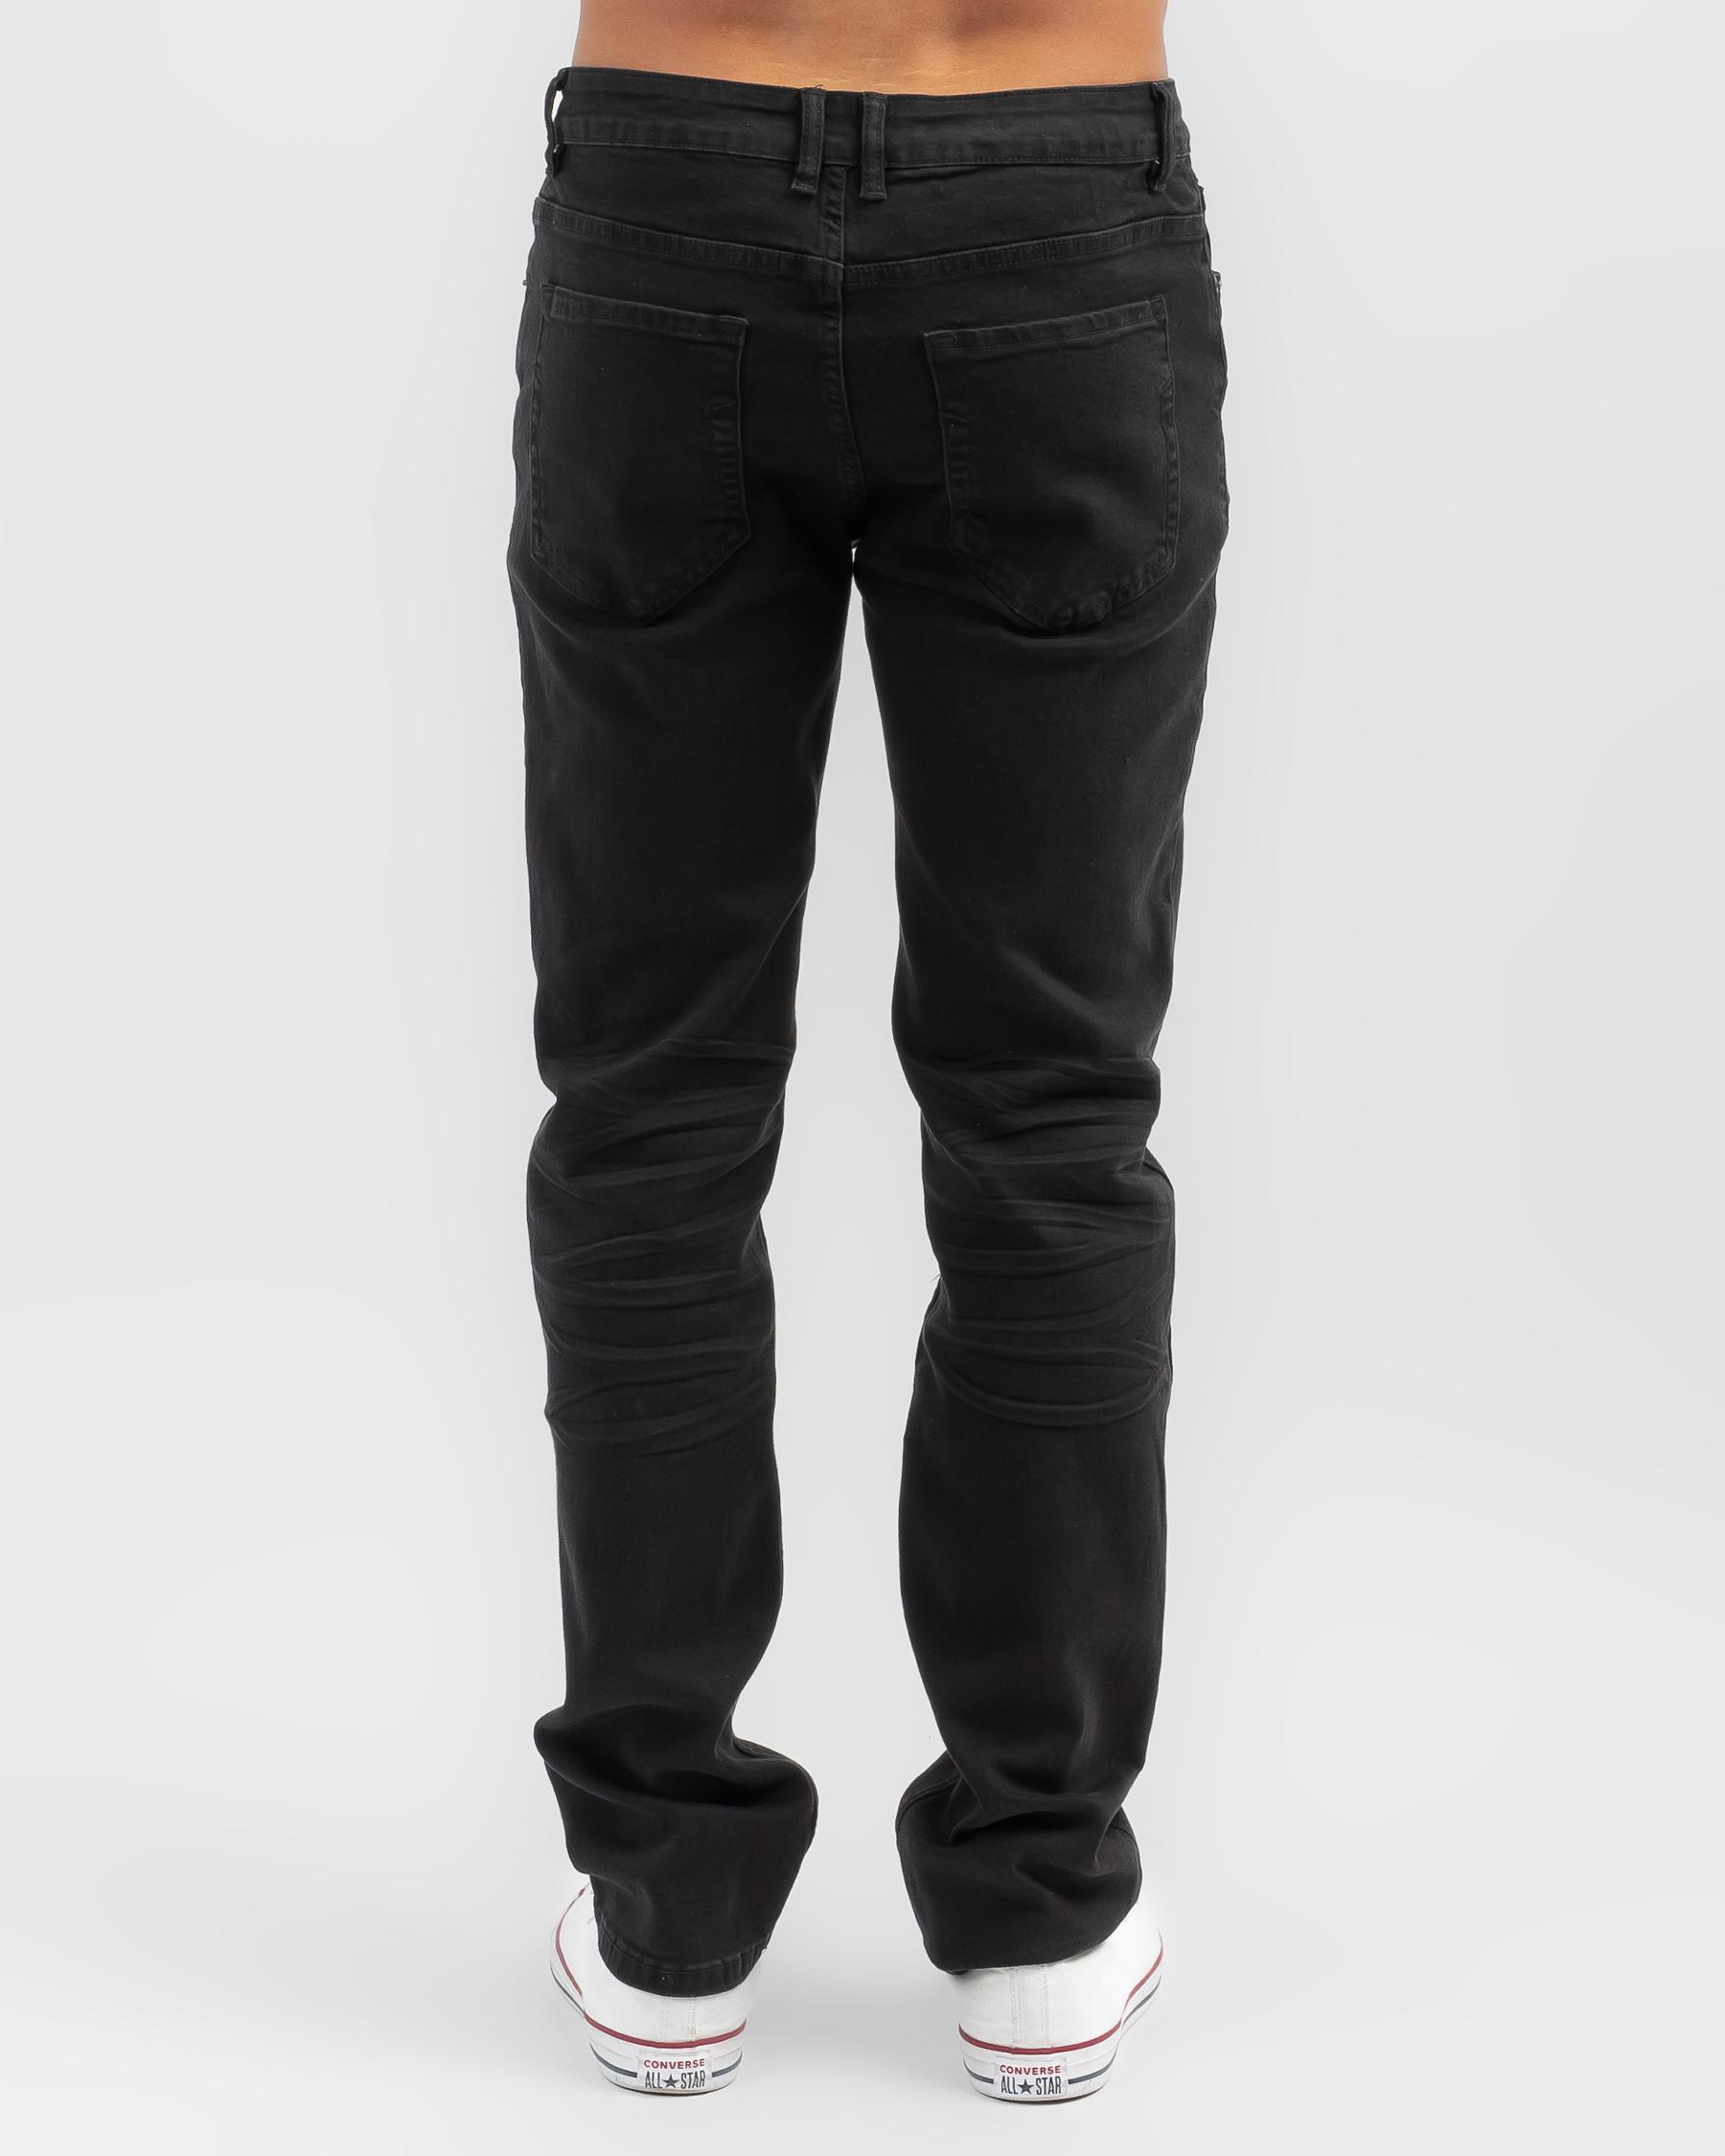 Jacks Altitude Jeans In Black - Fast Shipping & Easy Returns - City ...